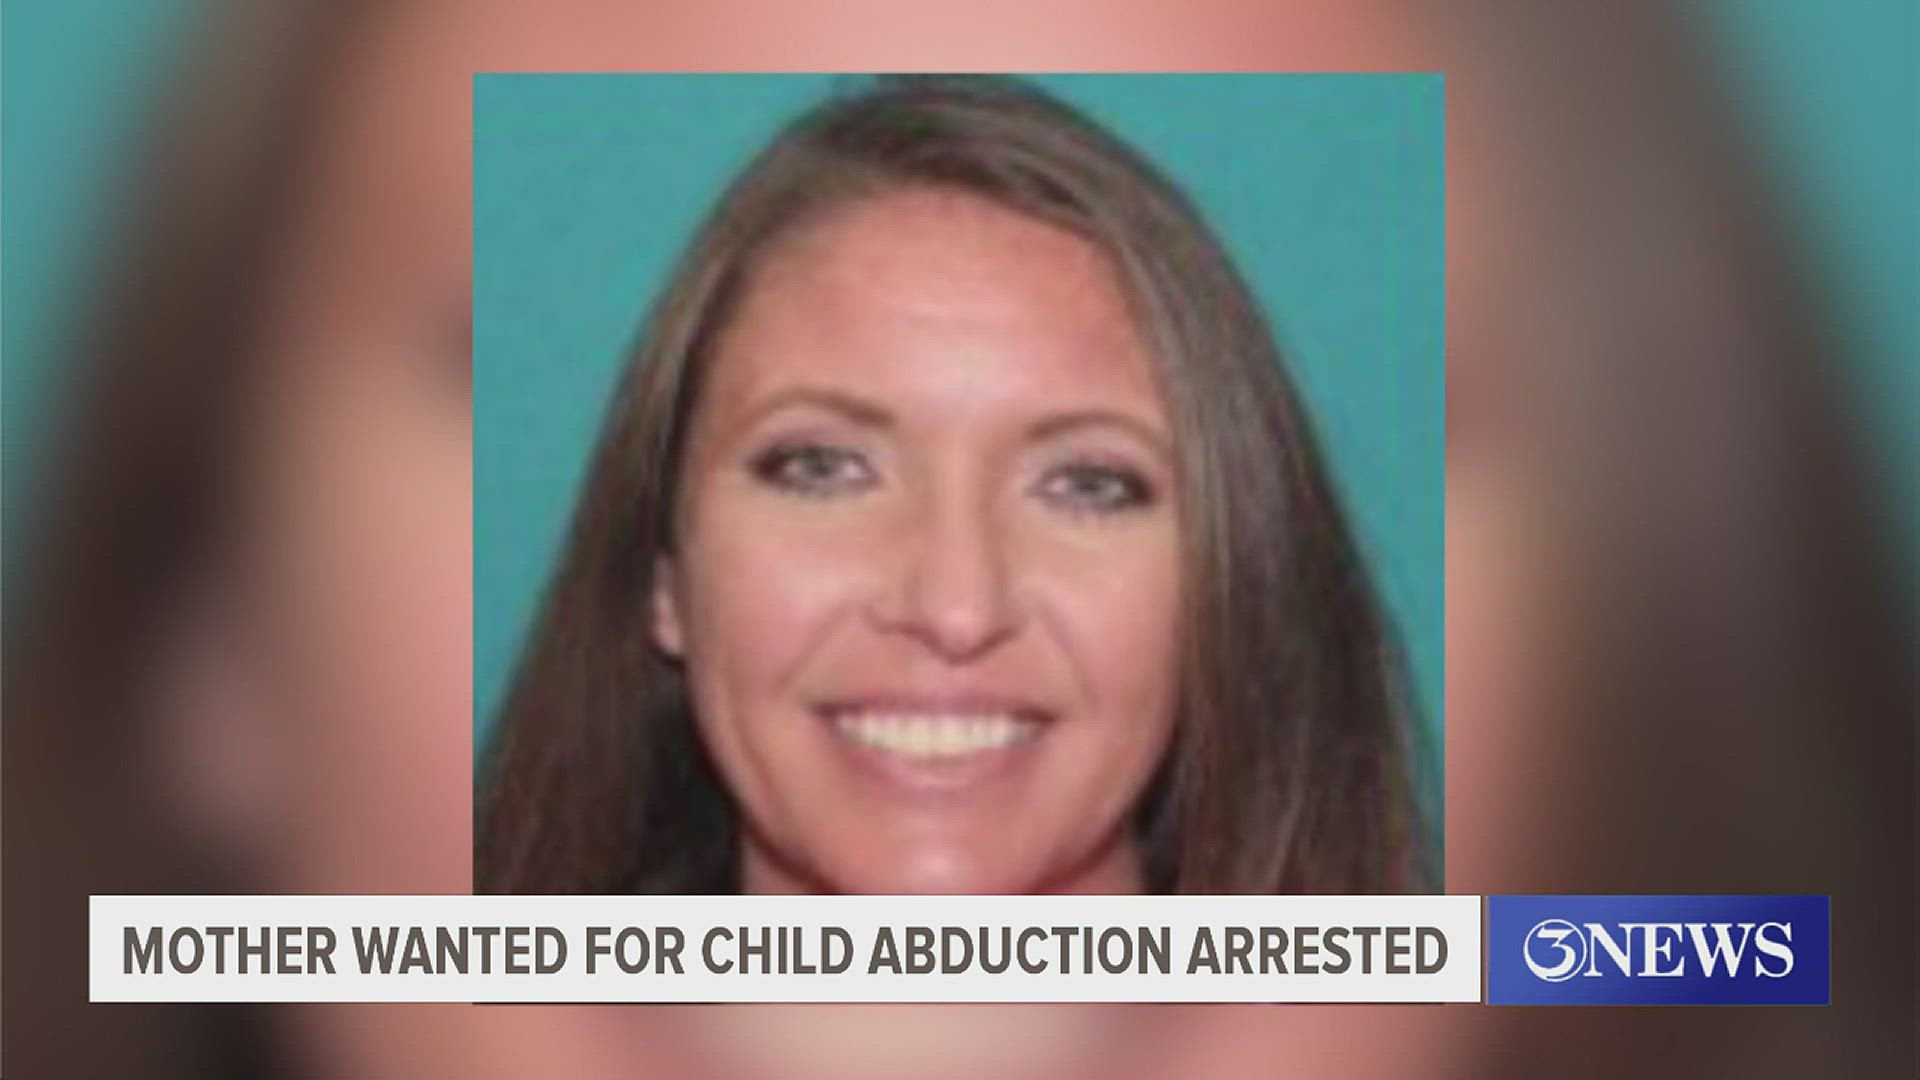 Investigators found Sarah Smith had been deemed unfit to have custody of the boys by a Nueces County district court.